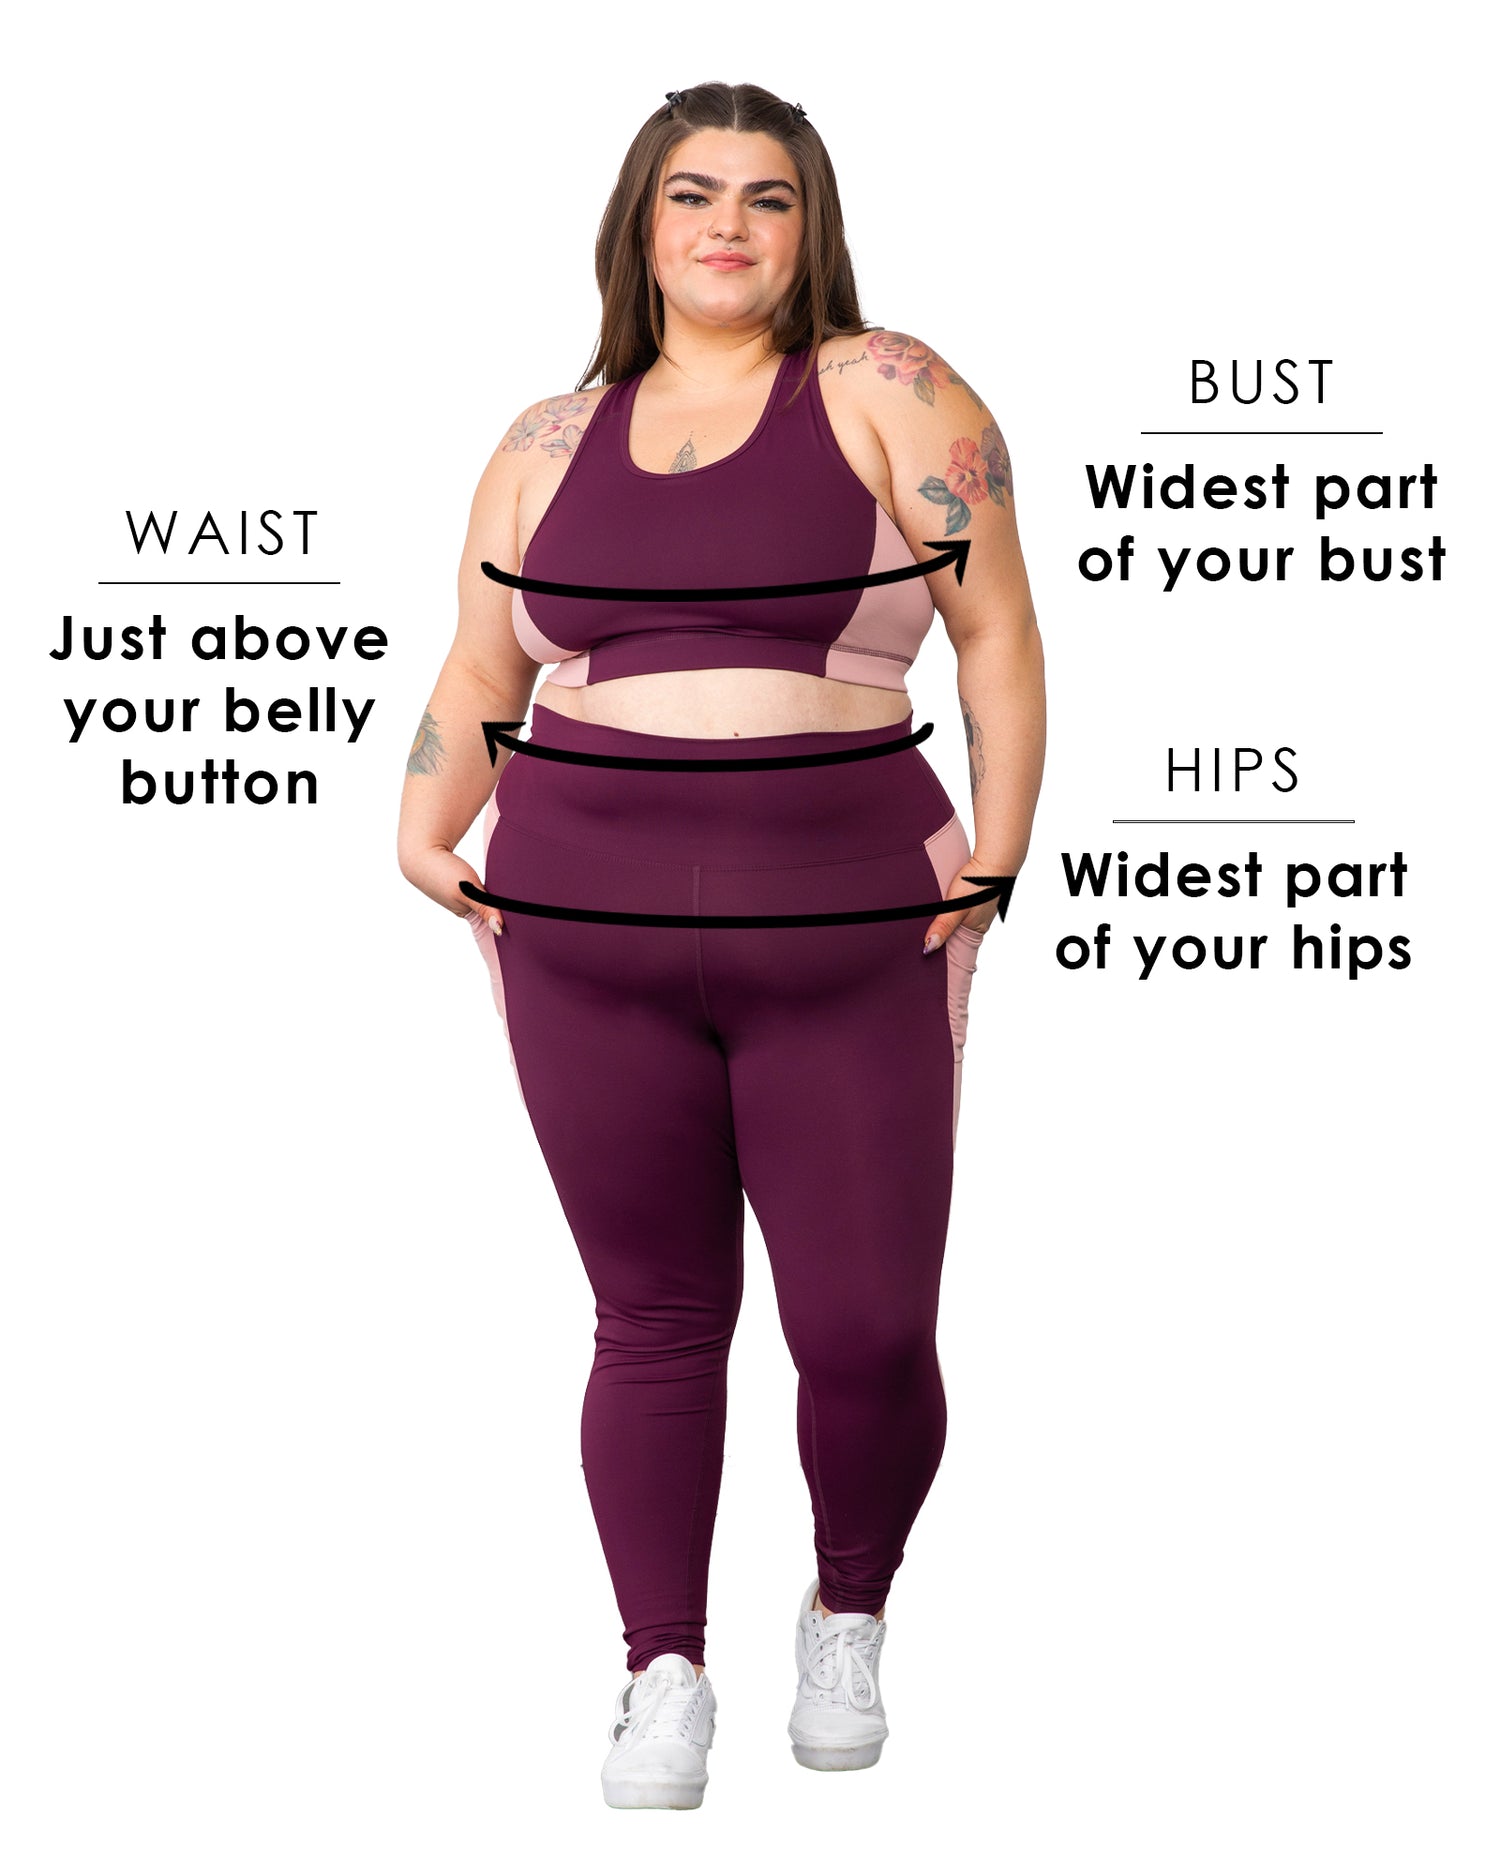 Everything You Ever Wanted to Know About Sizing and Fit